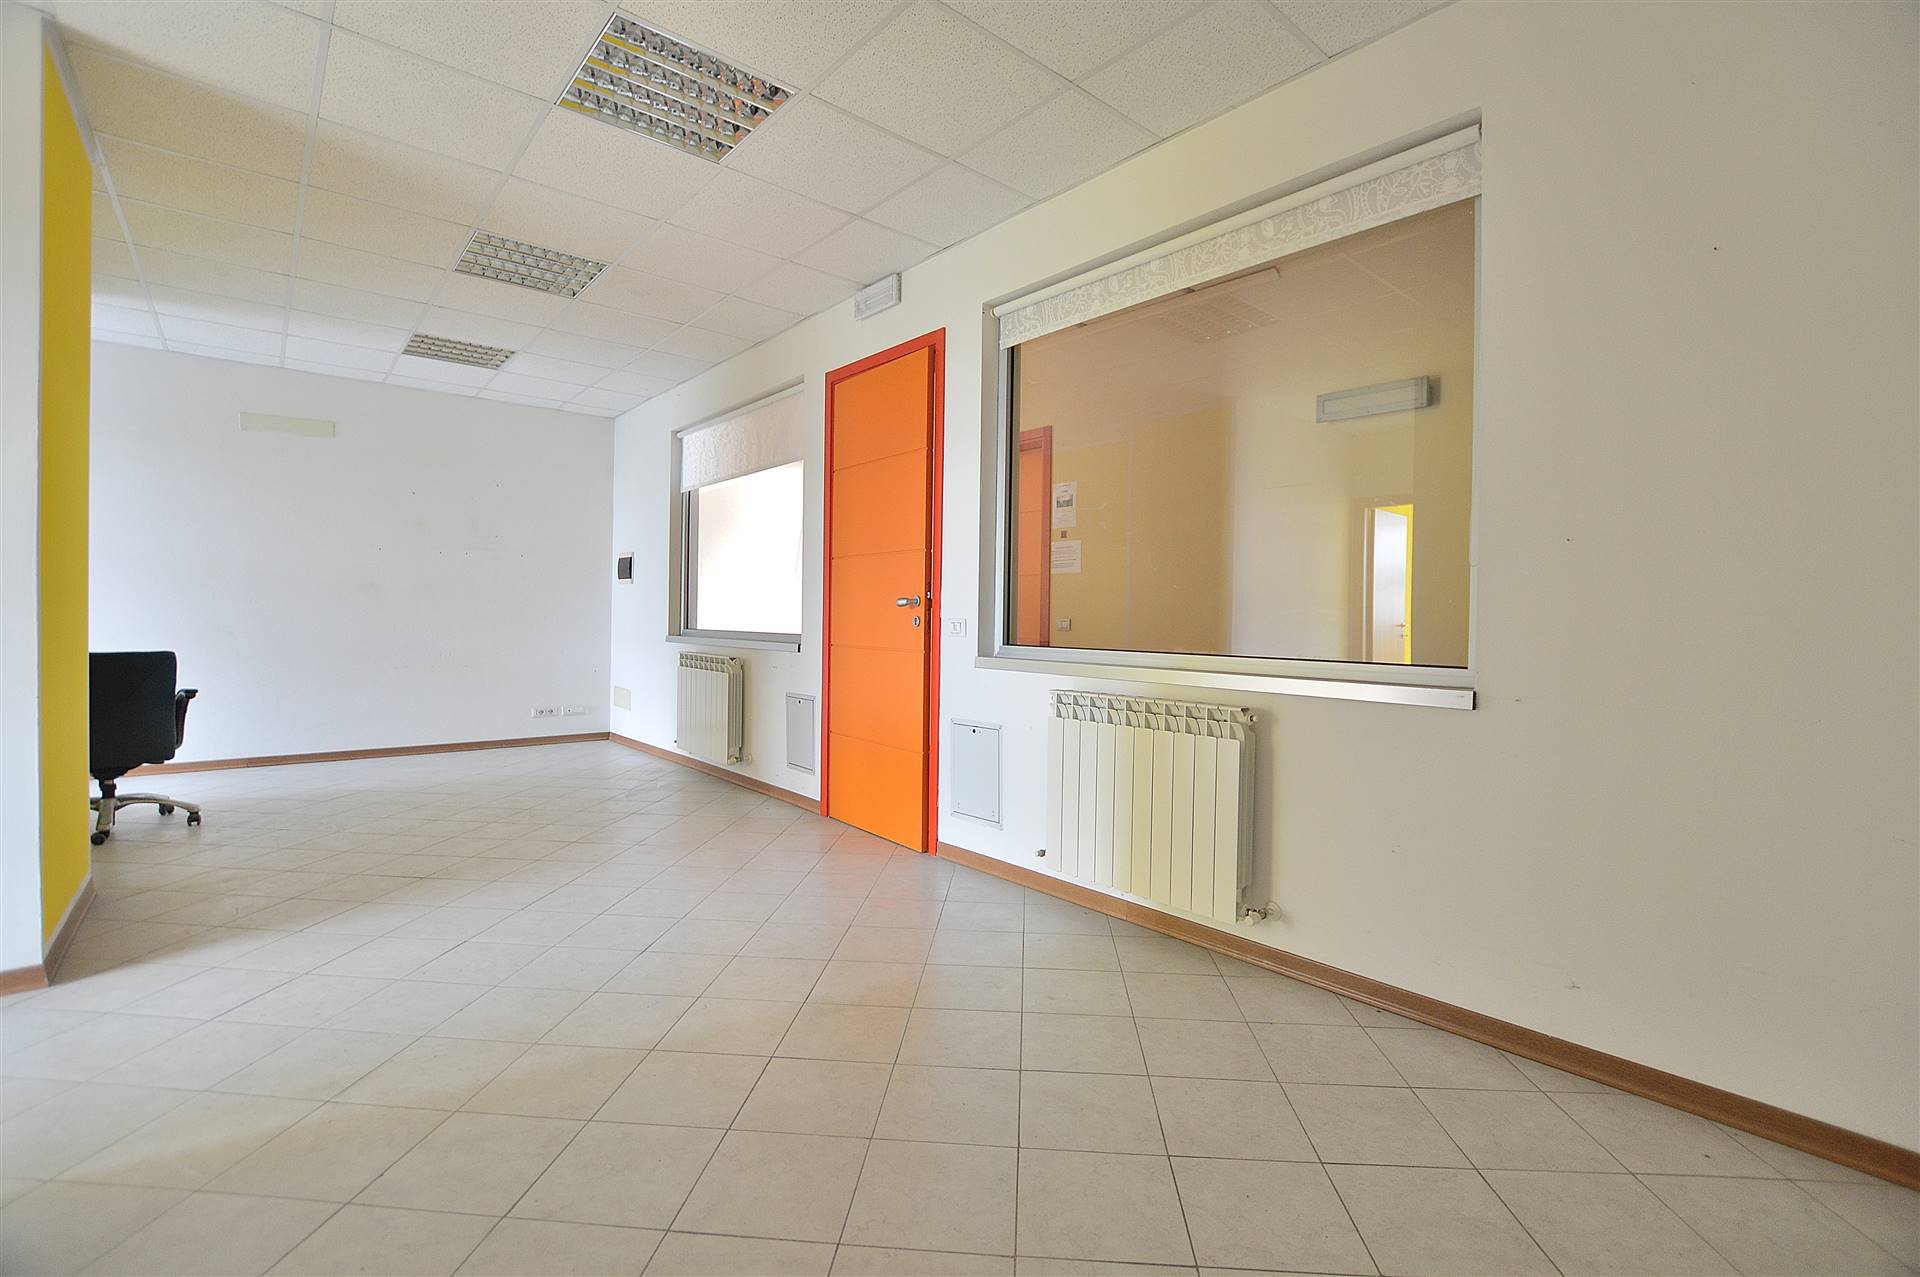 MONTERONI D'ARBIA, Office for sale of 84 Sq. mt., Heating Individual heating system, Energetic class: G, Epi: 363,9 kwh/m3 year, placed at 1° on 2, 